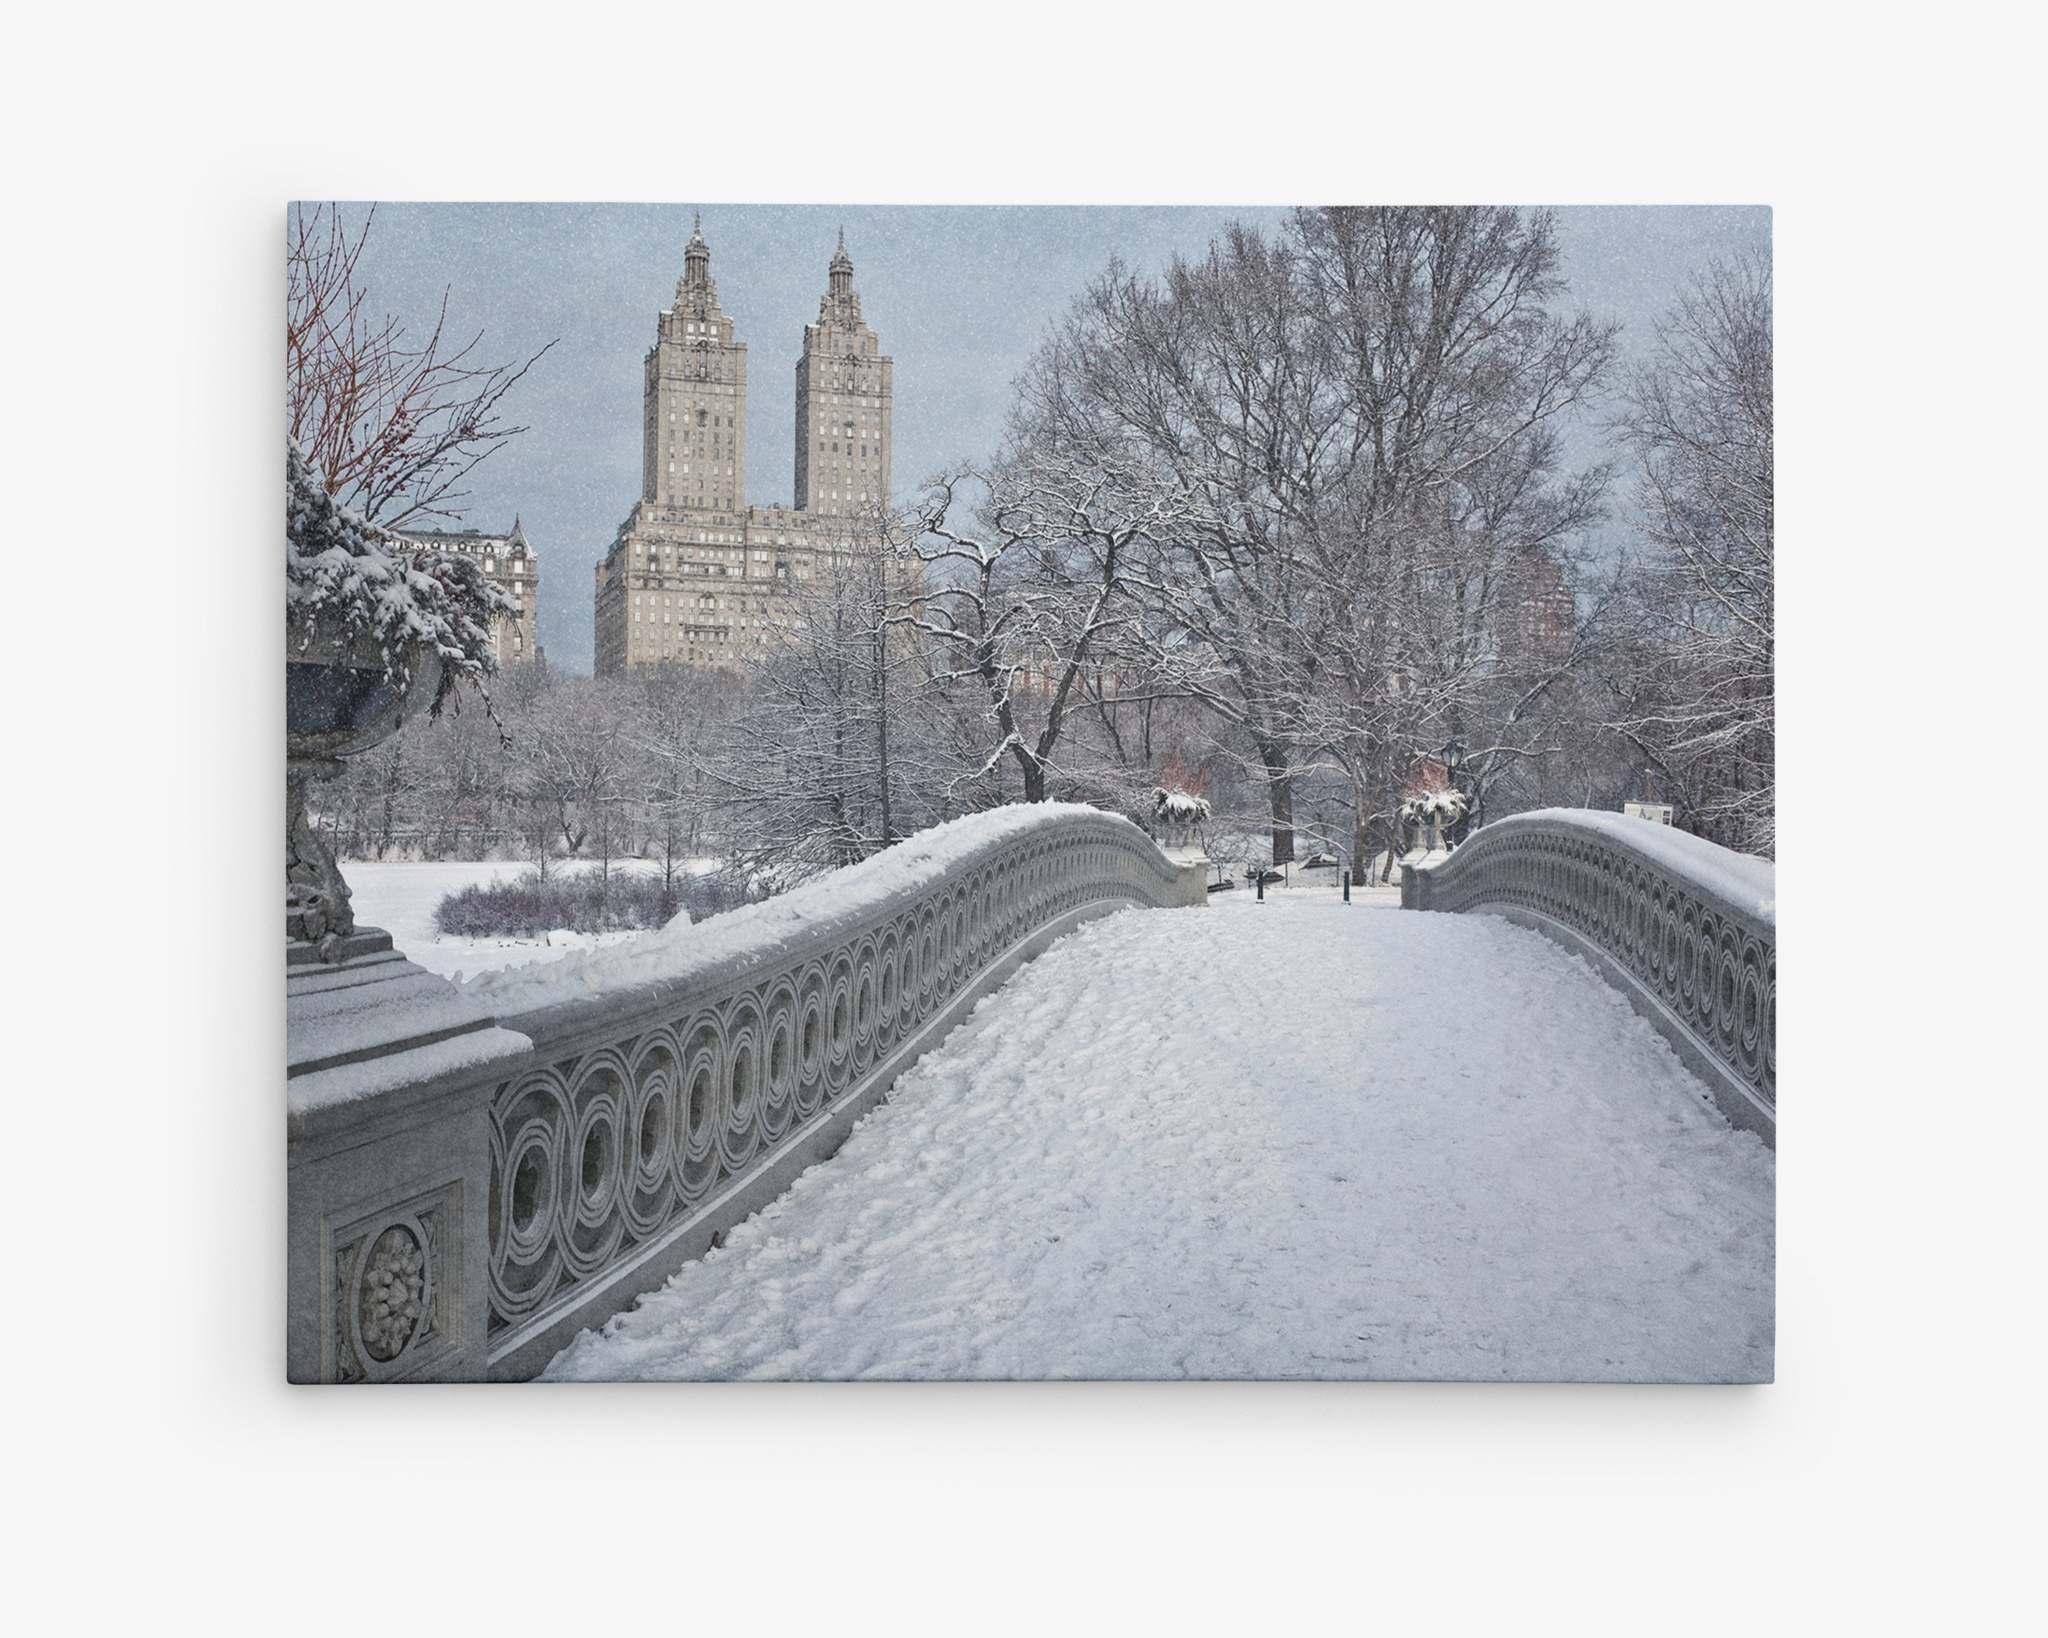 A snow-covered Bow Bridge leads into Central Park in New York City during winter. The trees are dusted with snow, and two iconic tall buildings are visible in the background, standing against a gray sky. The scene is quiet, serene, and picturesque—perfect for the Offley Green New York City Canvas Wall Art, 'Snow on Bow Bridge'.